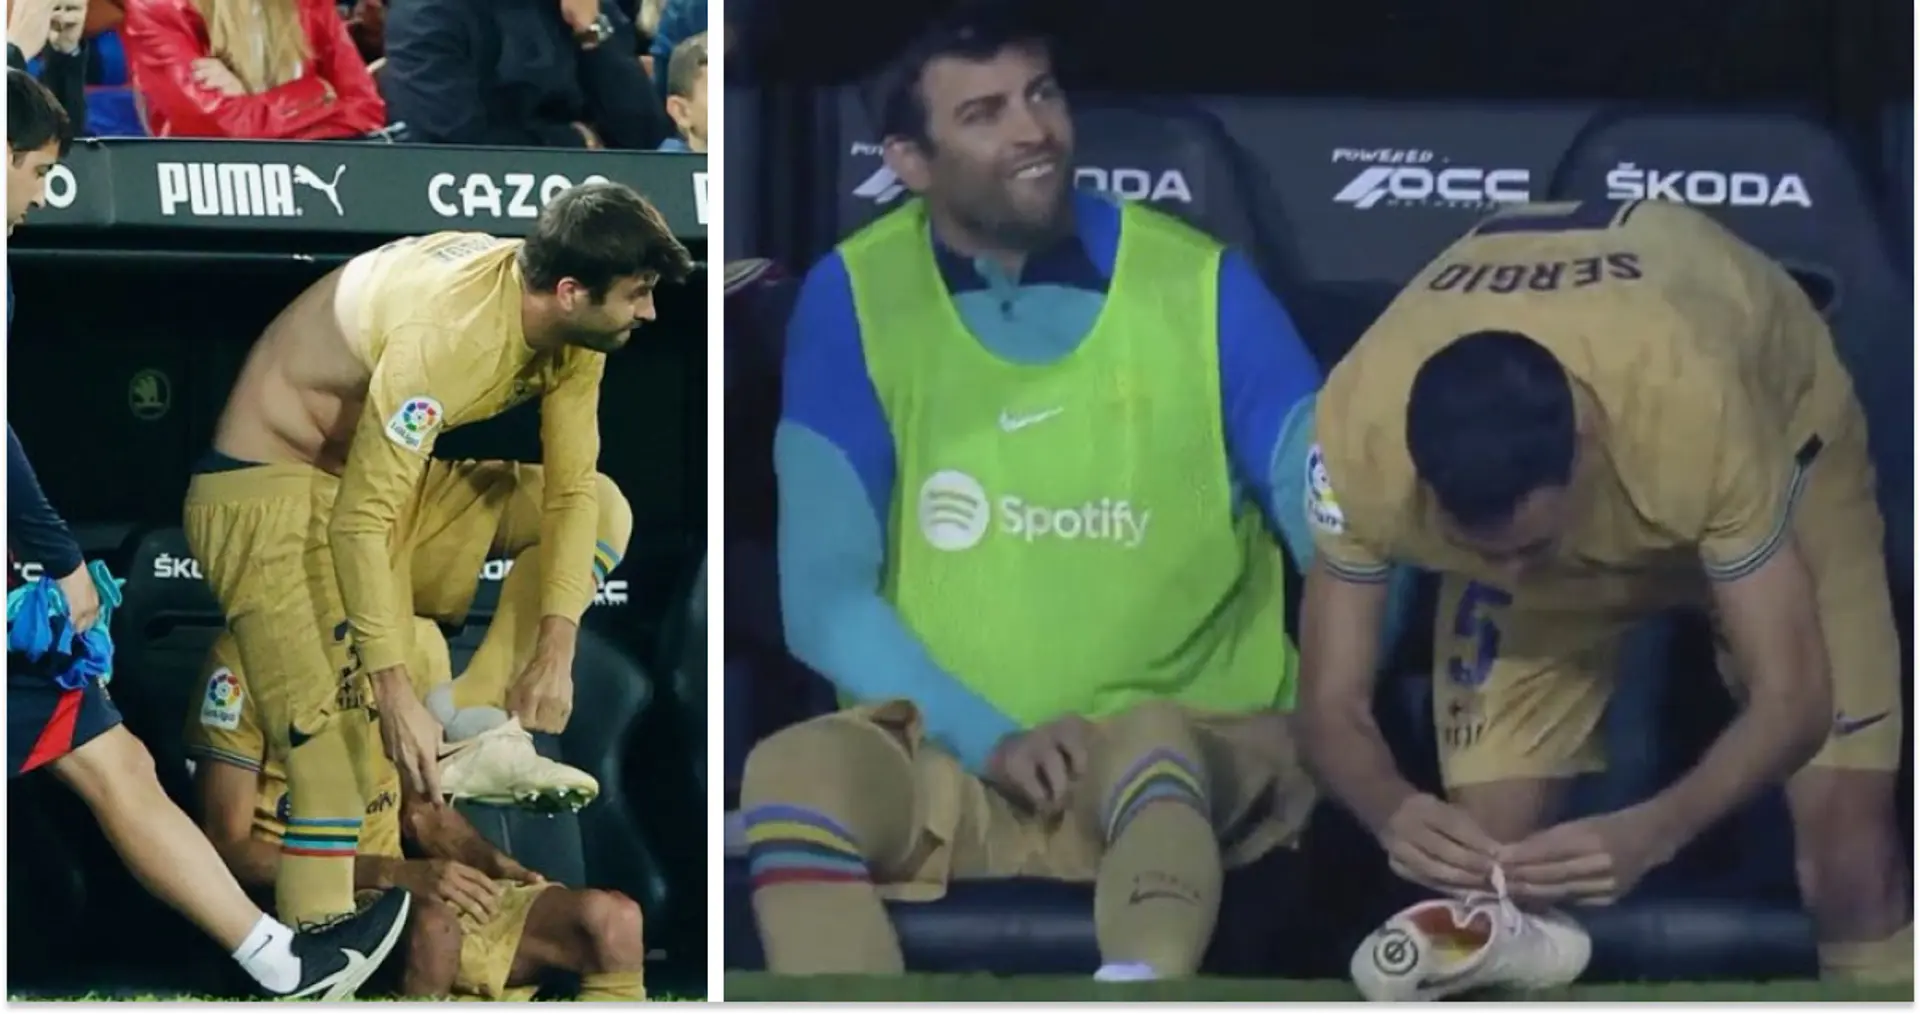 Spotted: Pique caught off guard by unexpected sub, Busquets helps untie his boots 